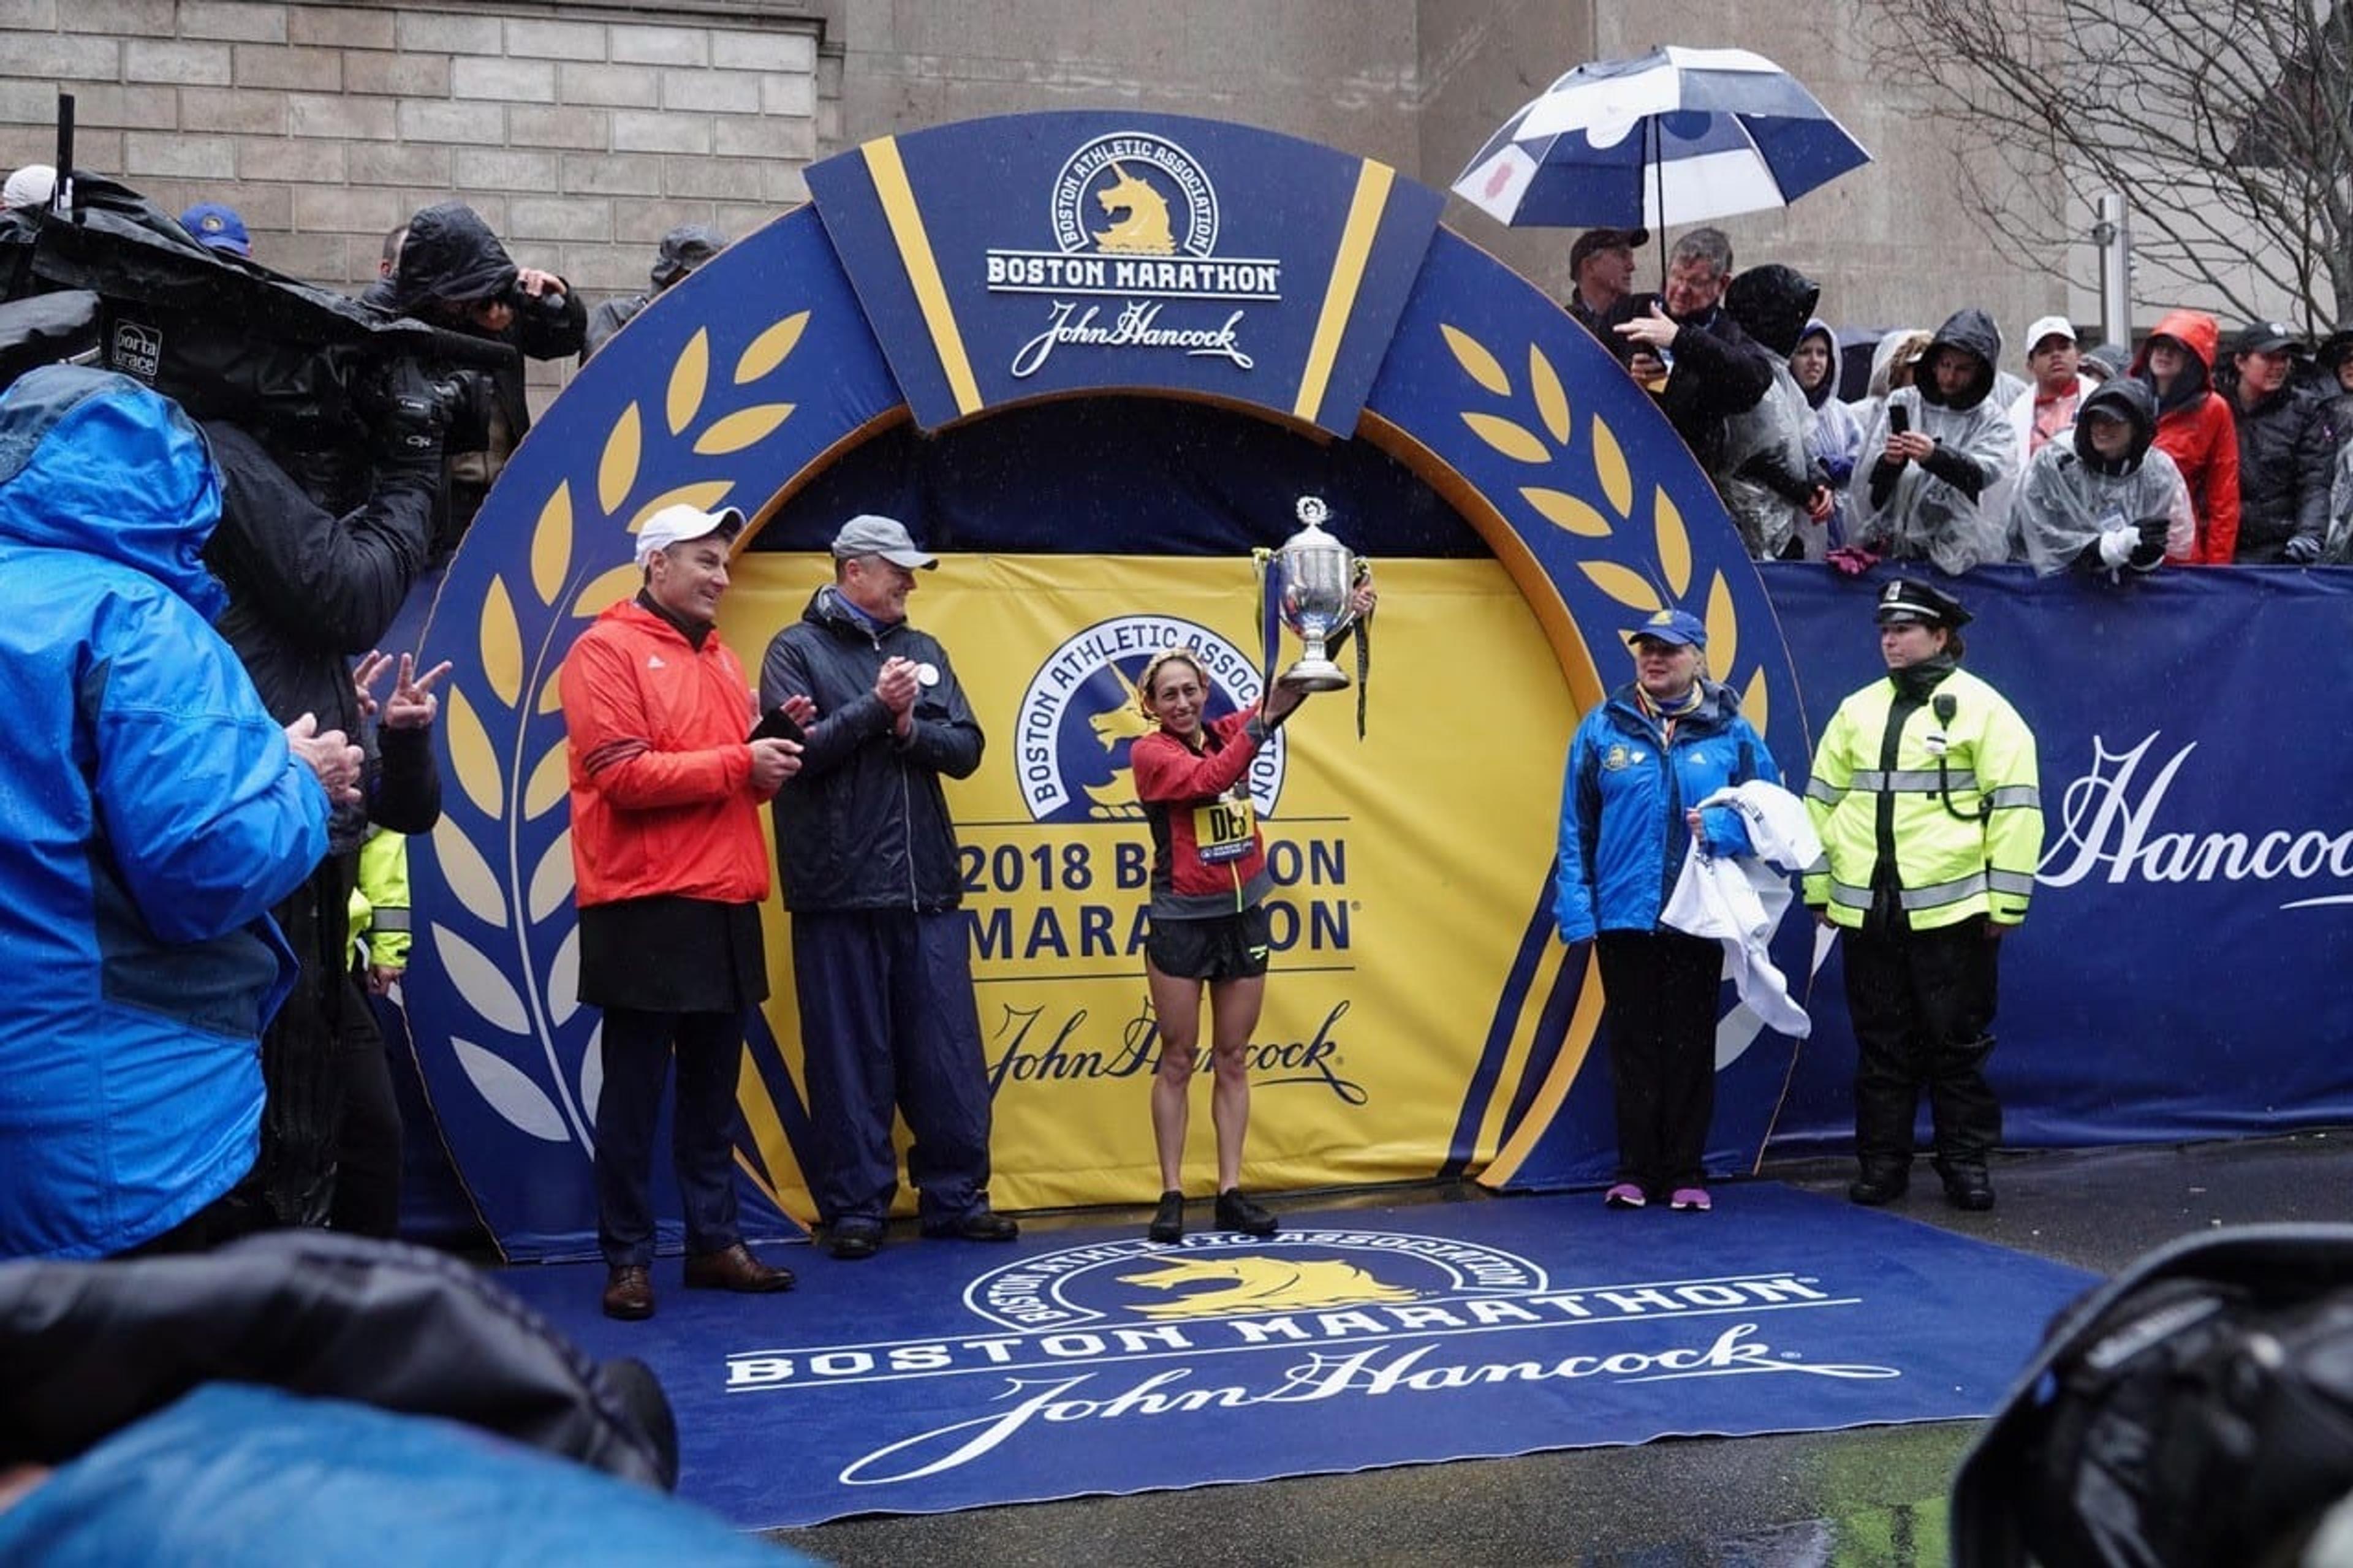 Photo of Desiree Linden holding up a trophy after winning the 2018 Boston Marathon.